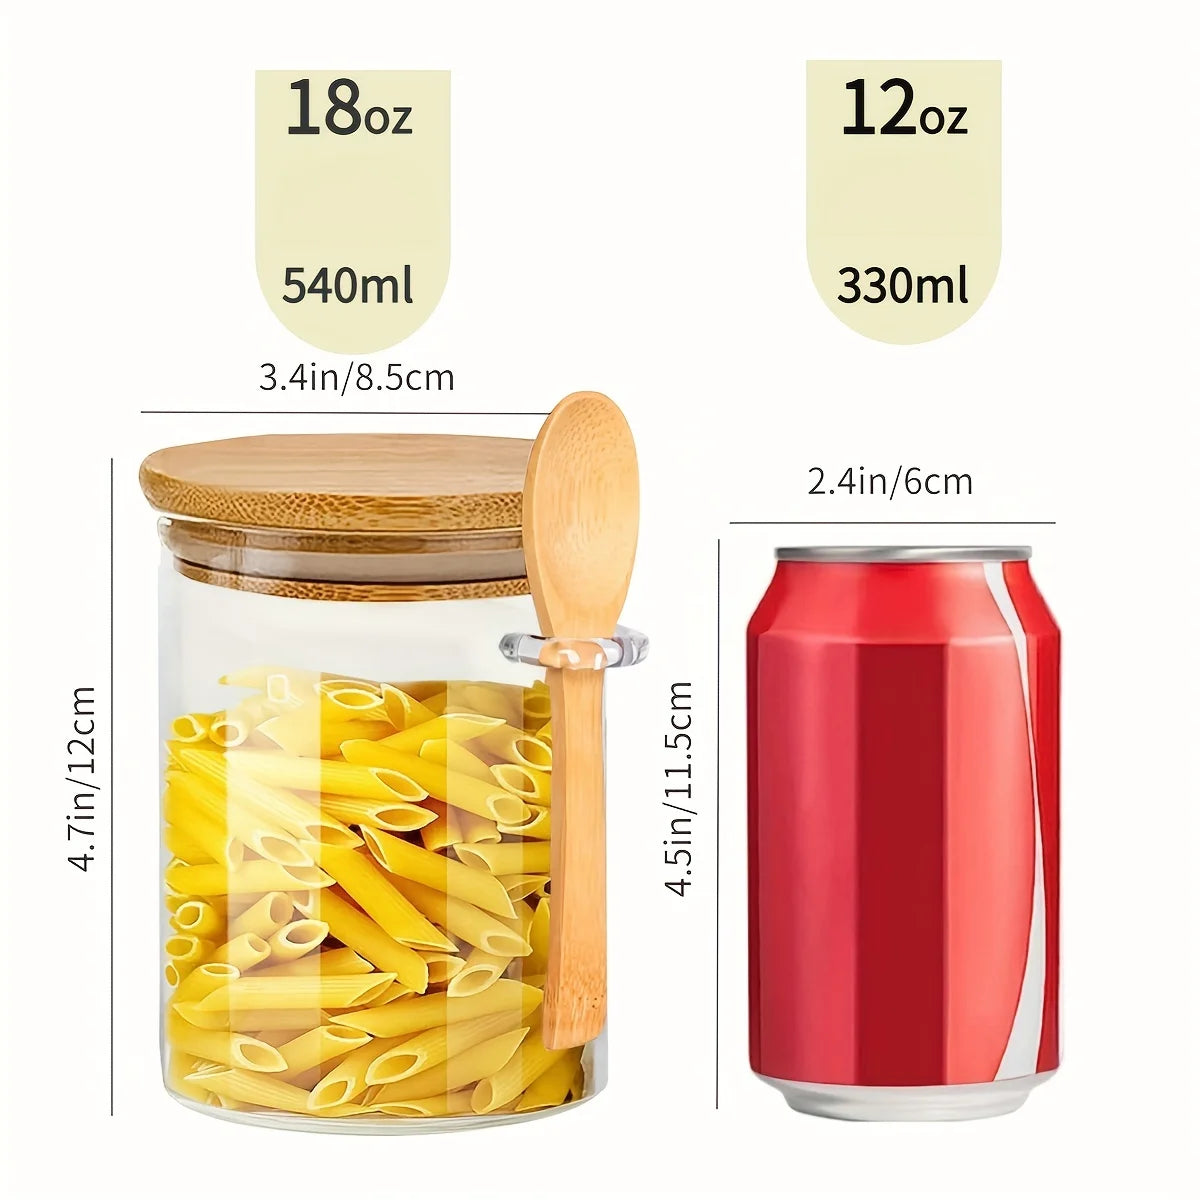 18oz Airtight Glass Jars With Lids And Spoons, Candy Jars With Lids, Clear Spice Jars, Small Food Storage Containers - Bee's to Find